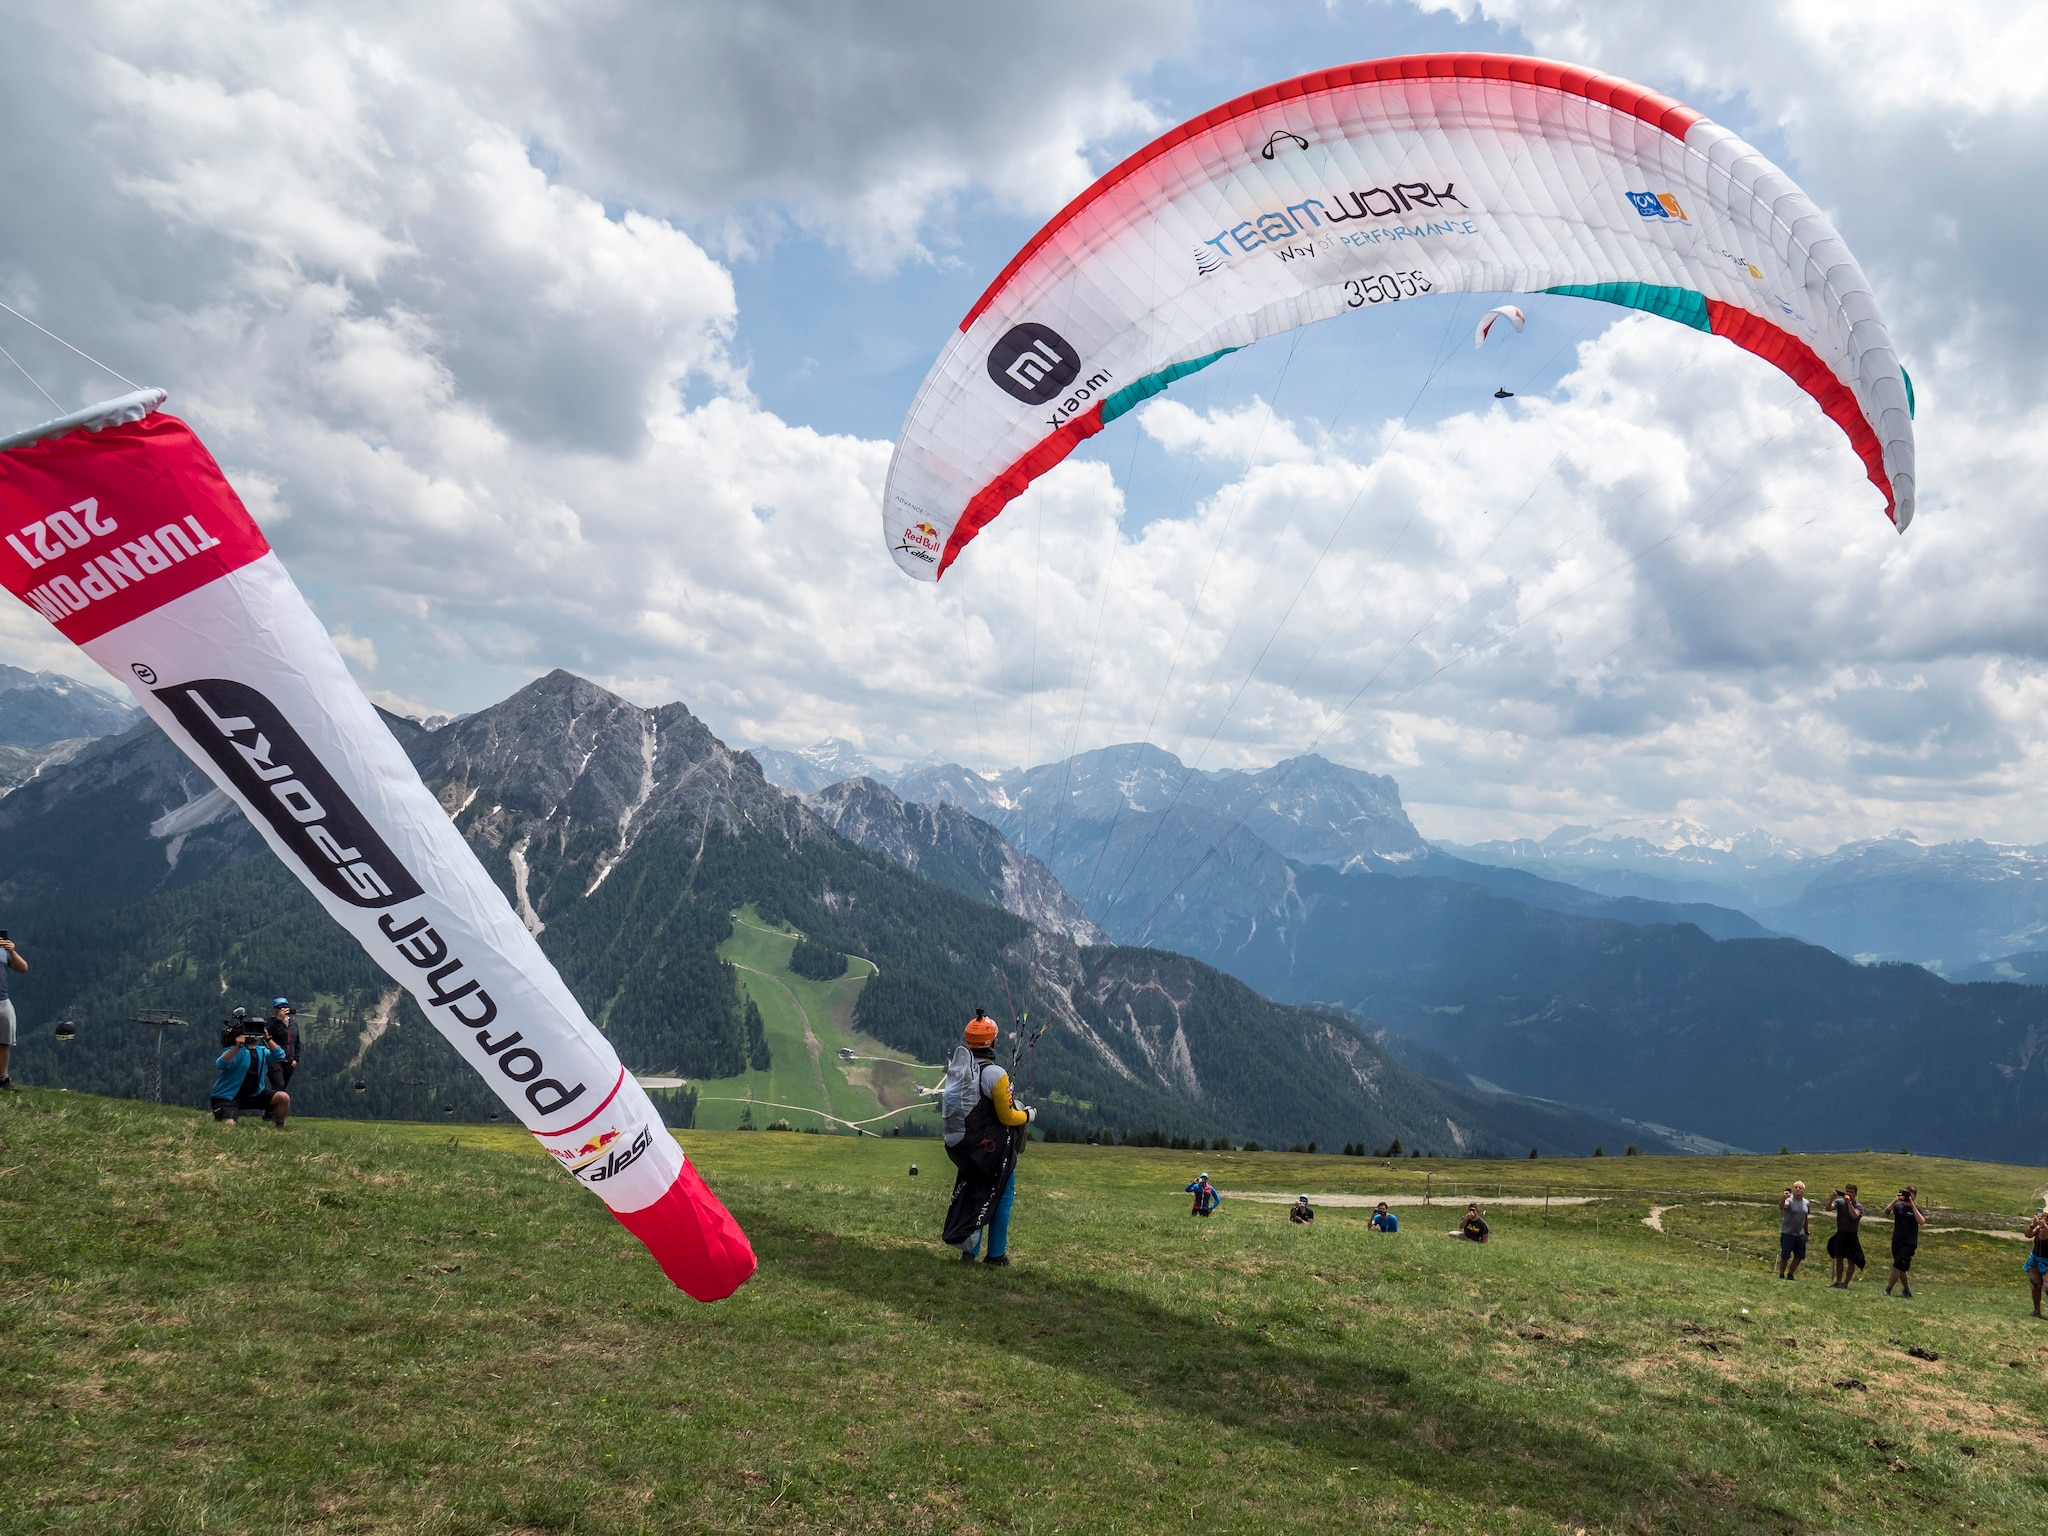 Chrigel Maurer (SUI1) performs during the Red Bull X-Alps 2021 at Kronplatz, Italy on June 28, 2021